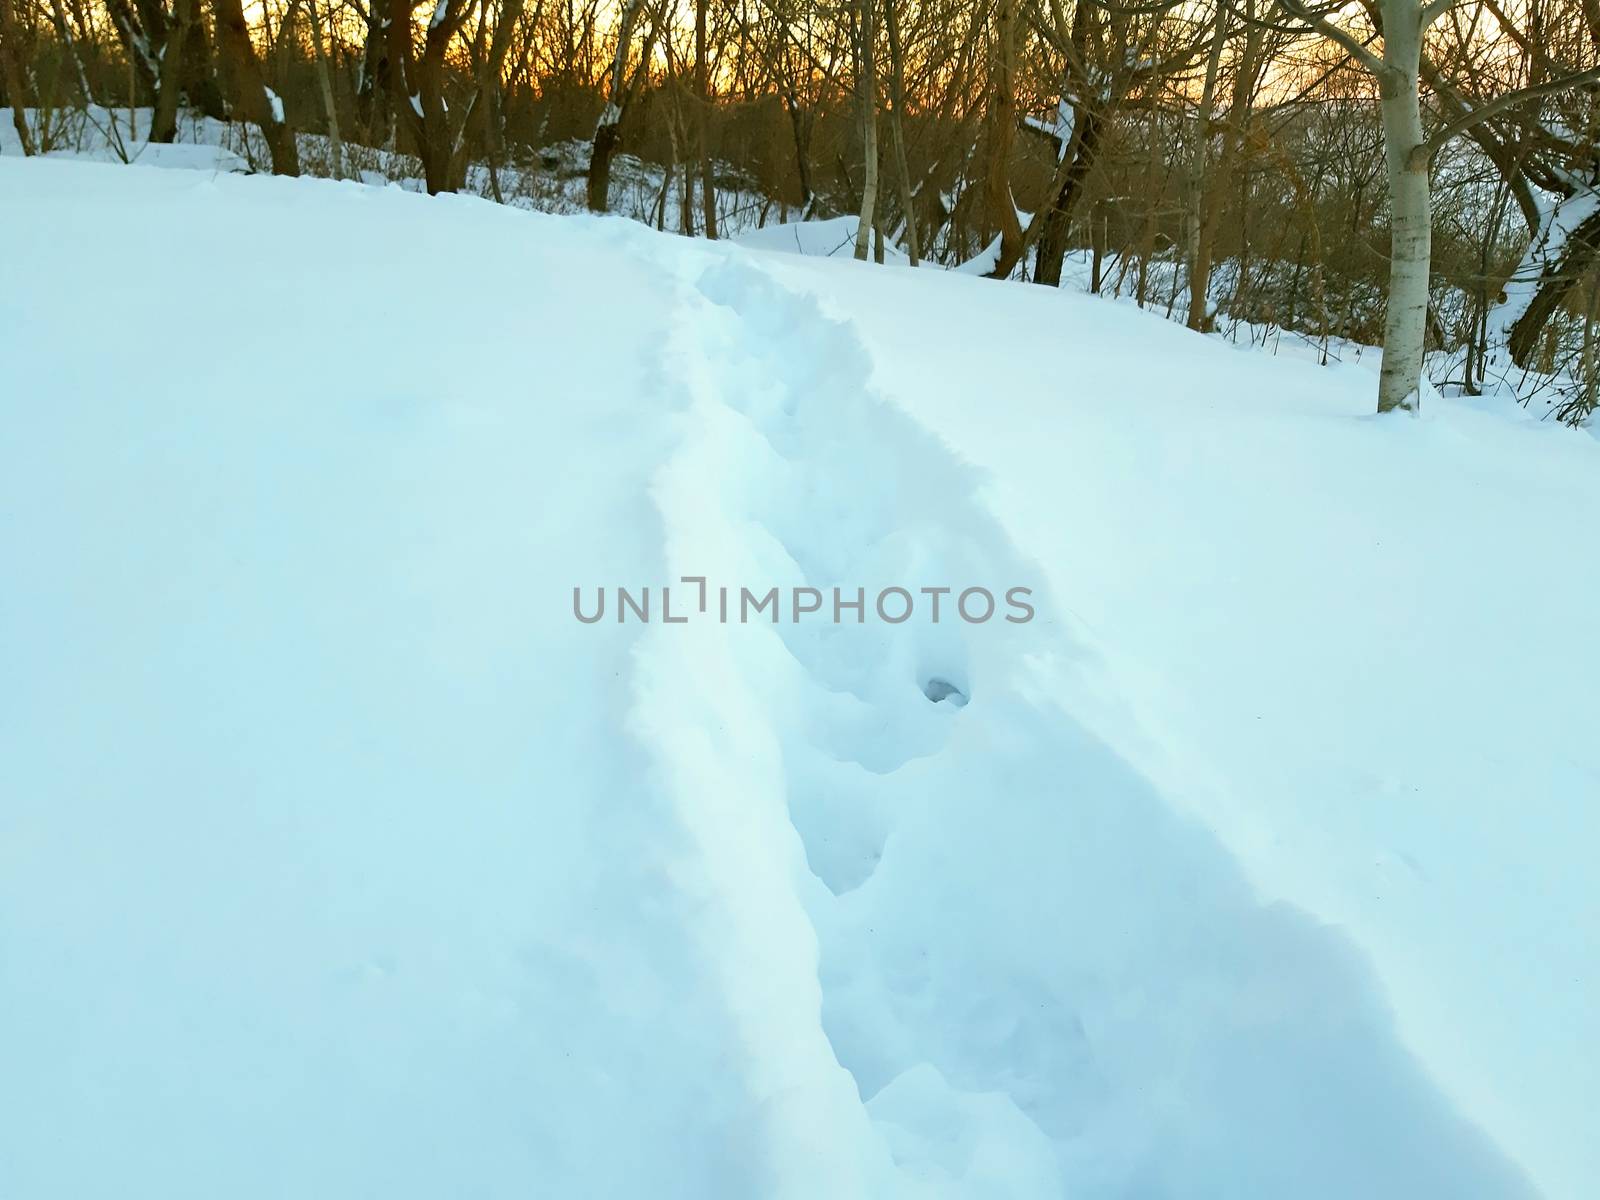 Path of footprints of animals and humans in the snow by Mindru